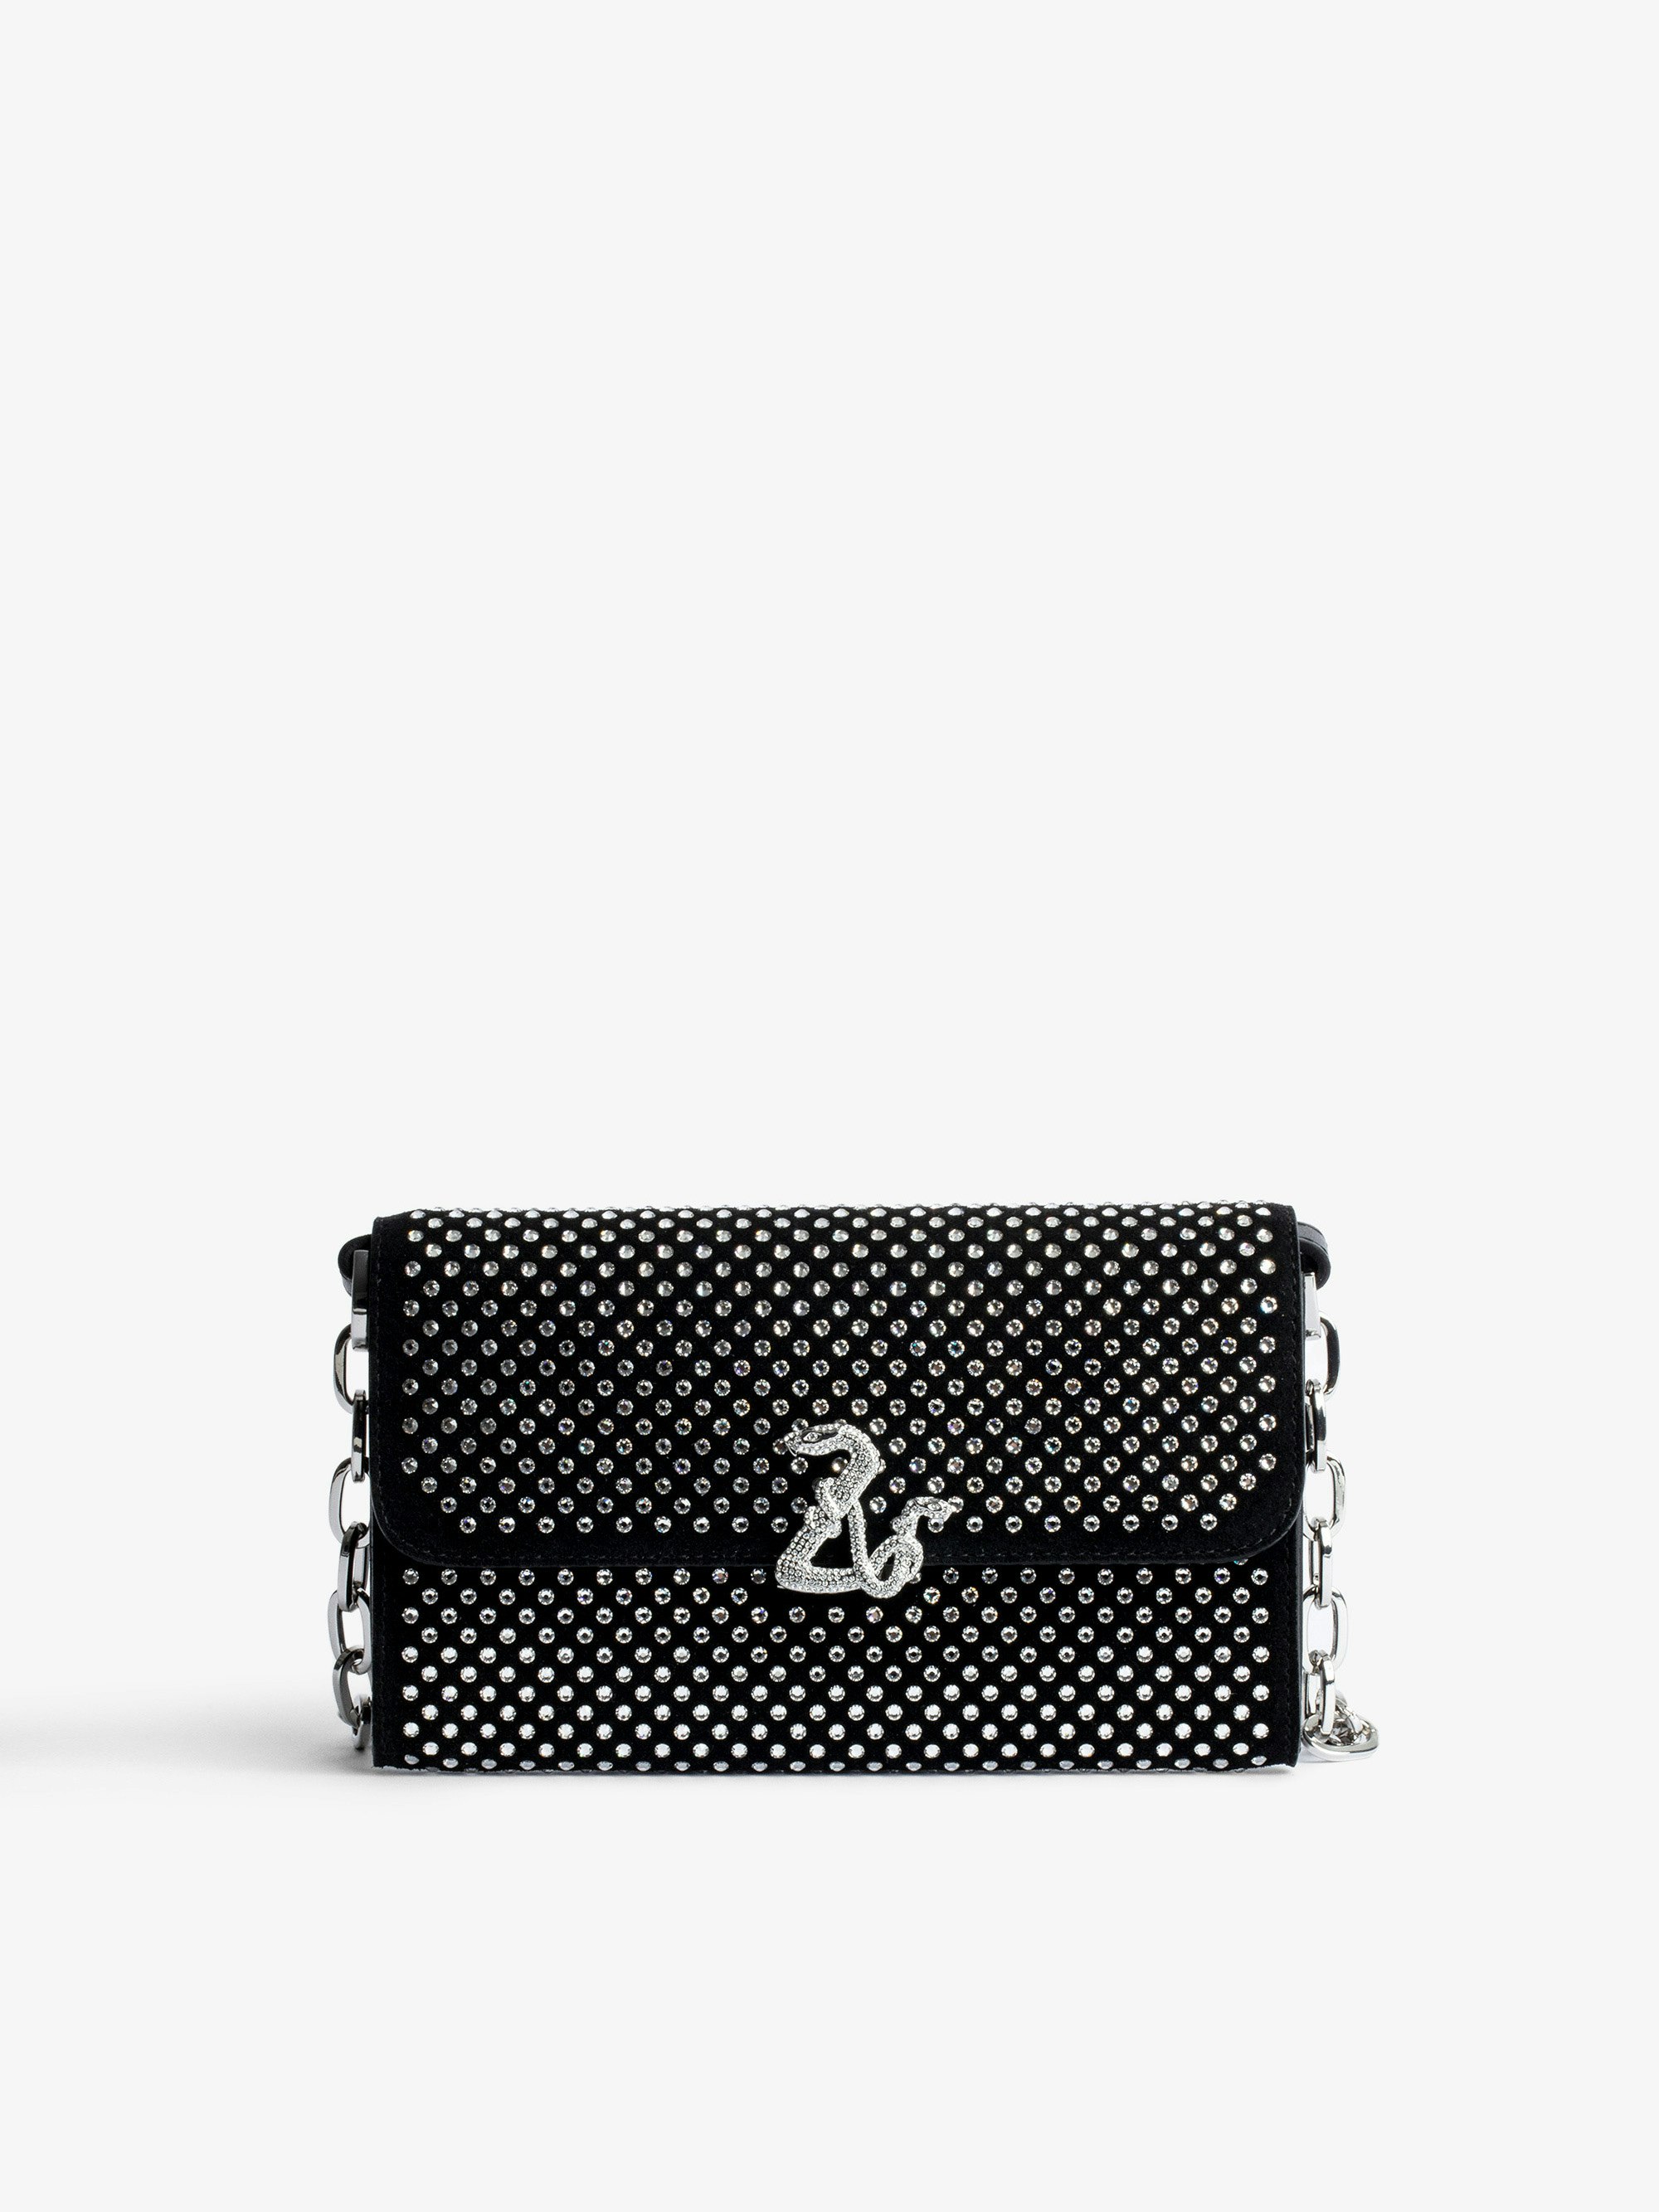 ZV Initiale Le Long Wallet - Women’s black leather wallet-style clutch with crystal embellishment, shoulder strap, and snake ZV clasp